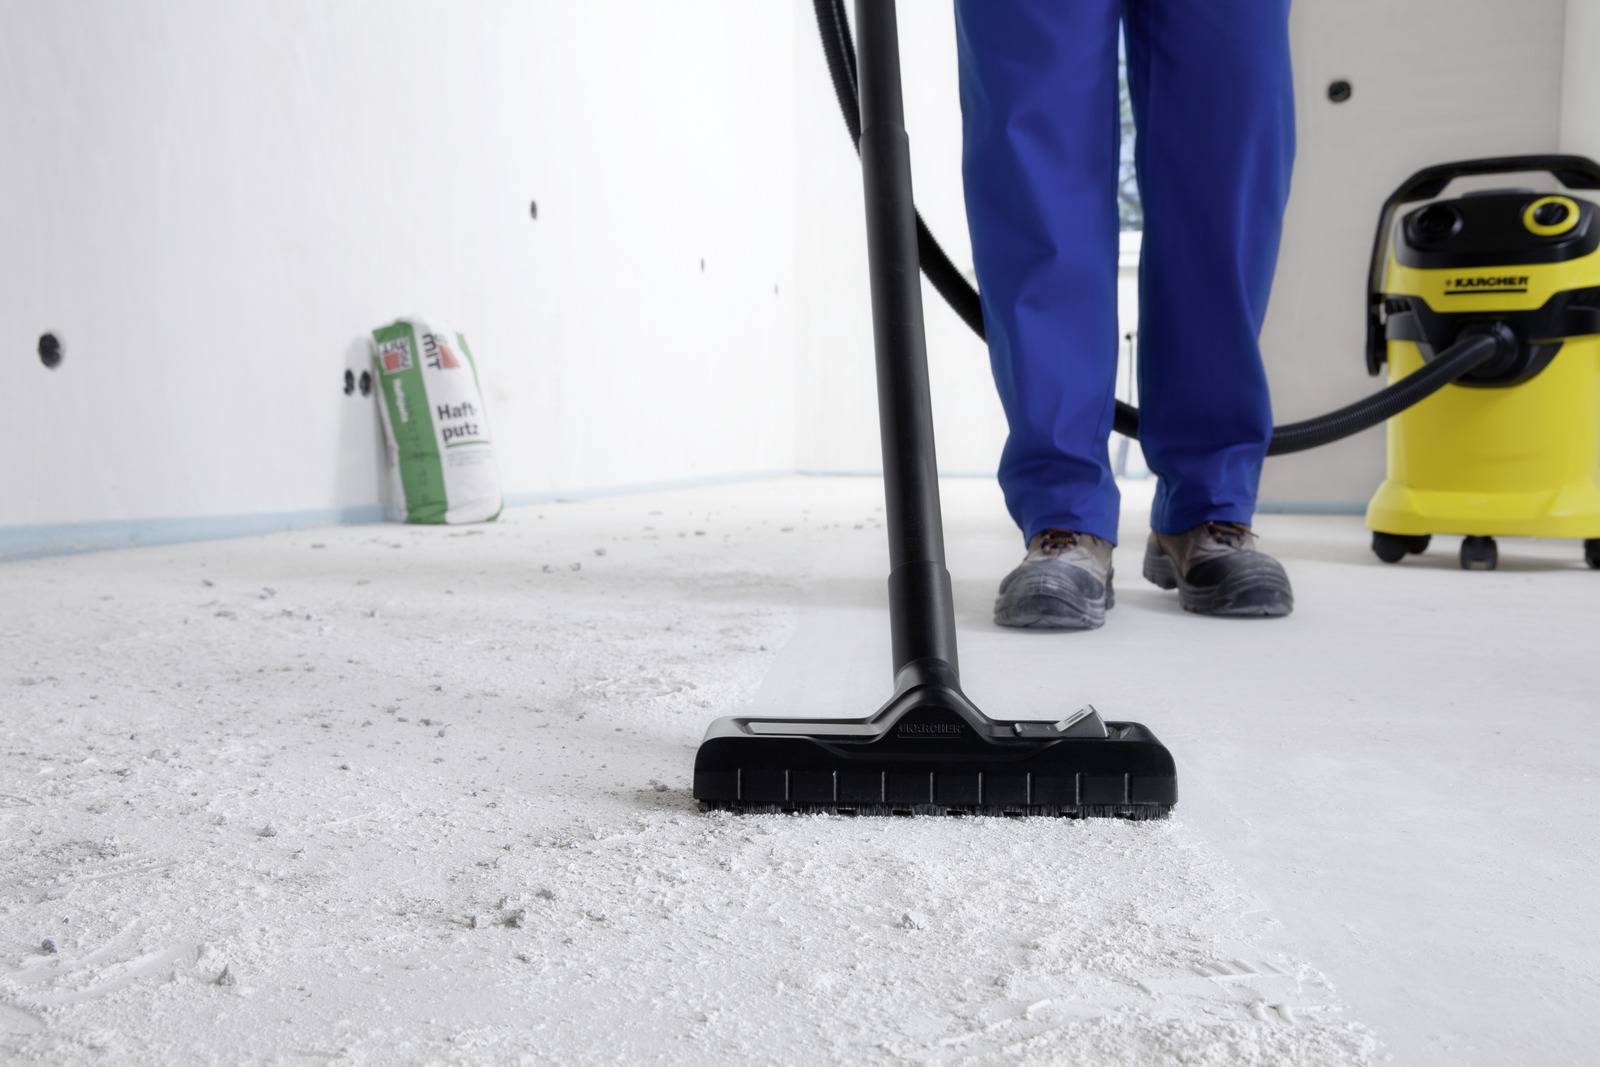 Karcher wet and dry vacuum cleaner being used in a garage